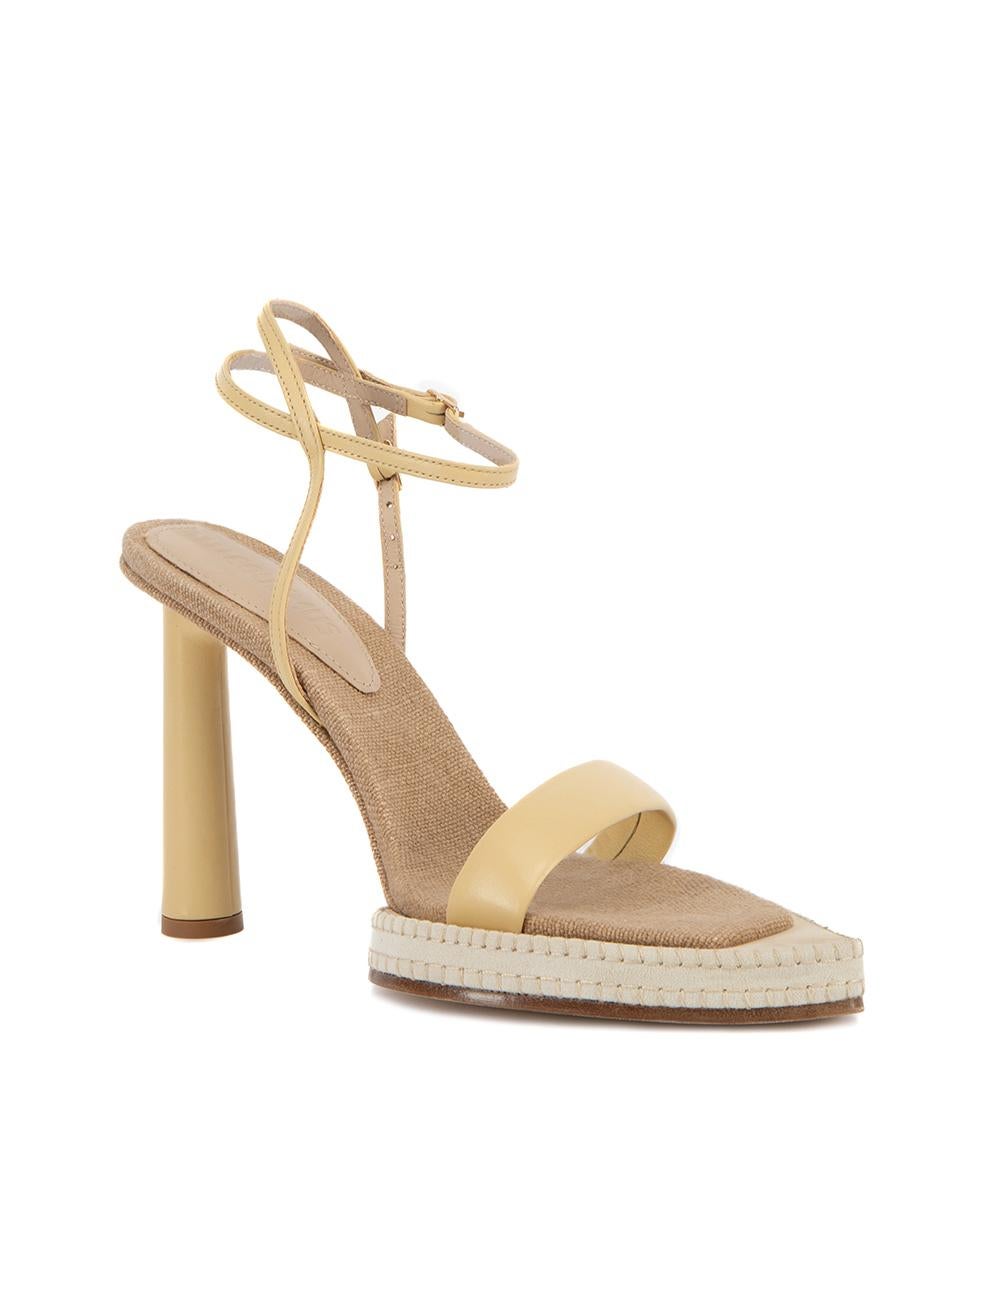 CONDITION is Very good. Minimal wear to heels is evident. Minimal wear to the toe point of the insole where light scuffs can be seen on this used Jacquemus designer resale item. This item comes with original dust bag. Details Beige Cloth Leather